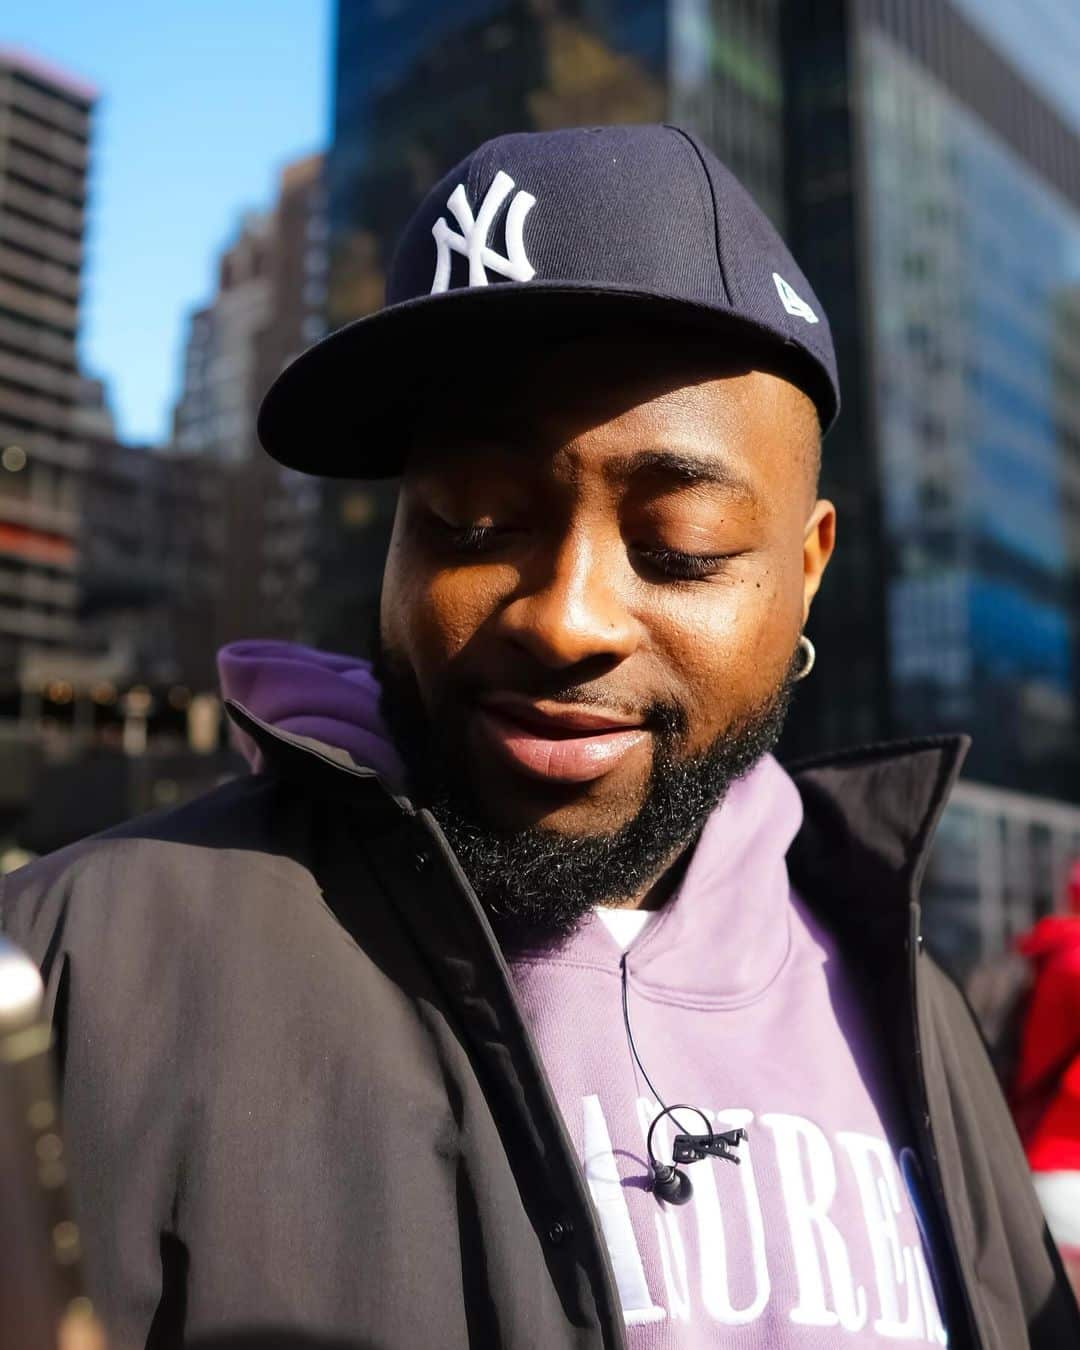 Why I took took legal action against fake news of my arrest – Davido